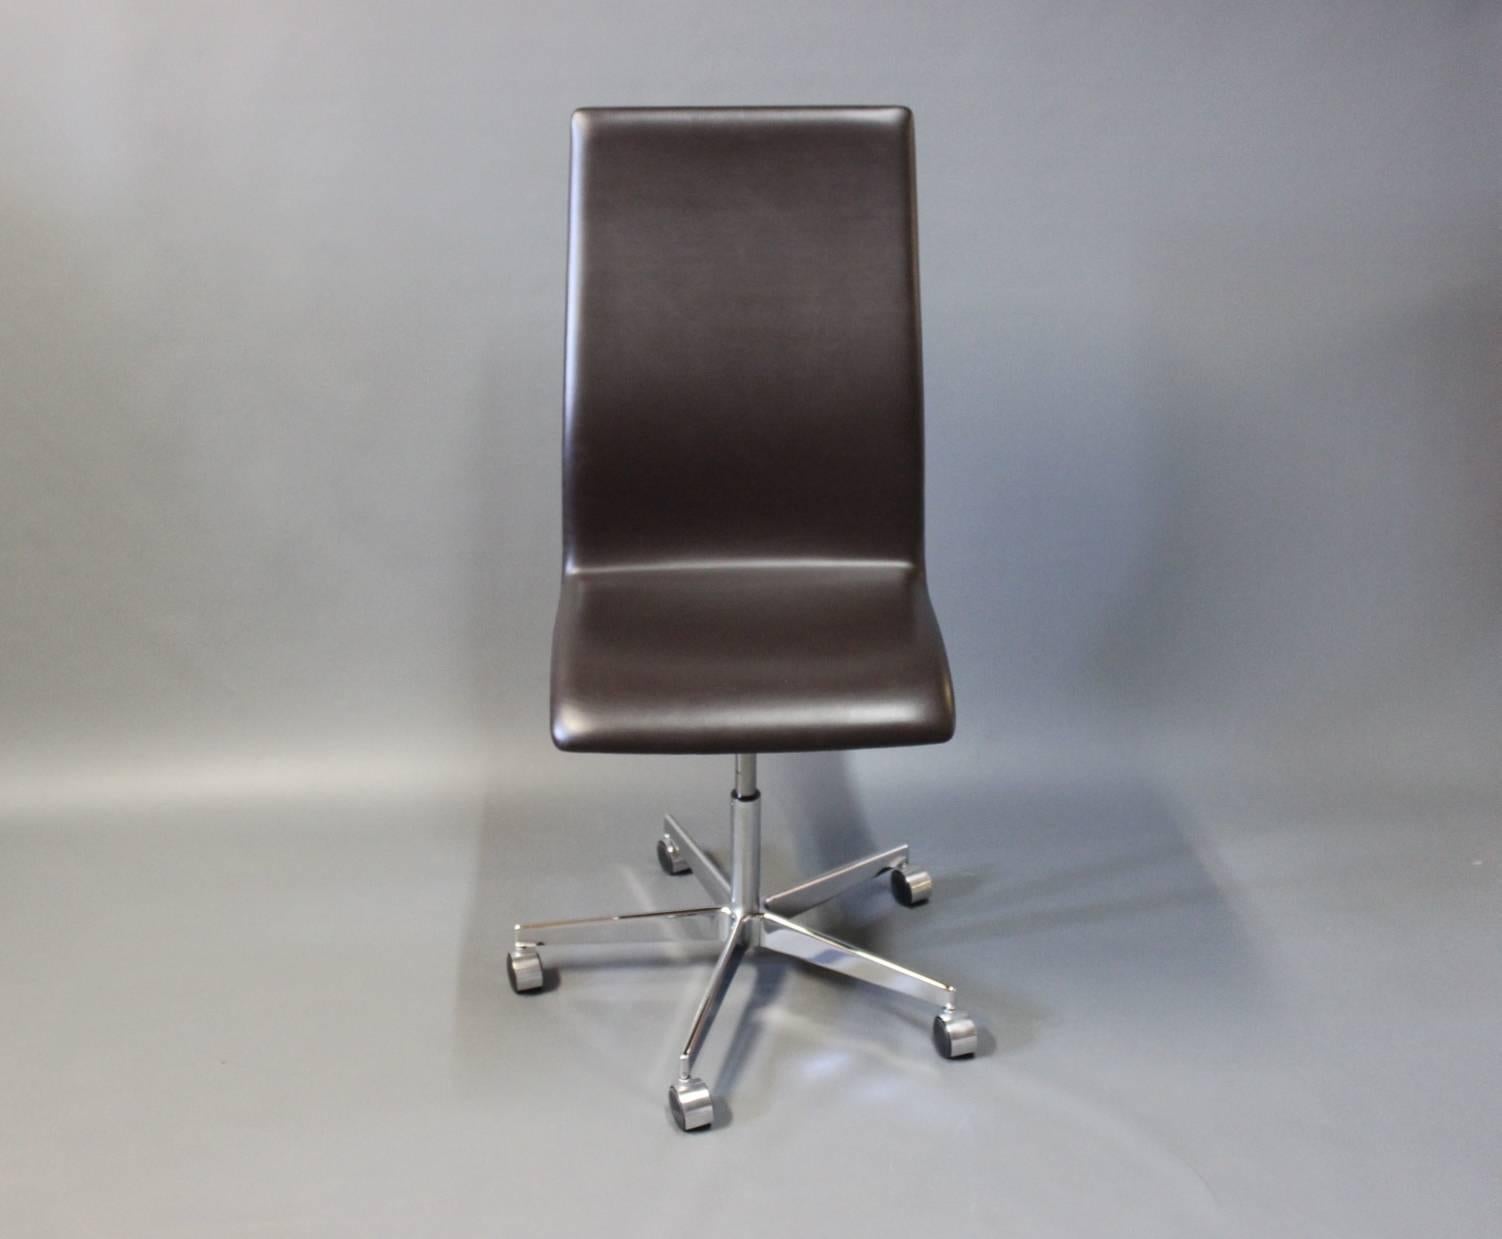 Oxford chair designed by Arne Jacobsen in 1963 and manufactured by Fritz Hansen in 2014. The chair is upholstered in dark brown leather and with wheels beneath. It was originally designed in 1963 only for the professors of St. Catherine's College in